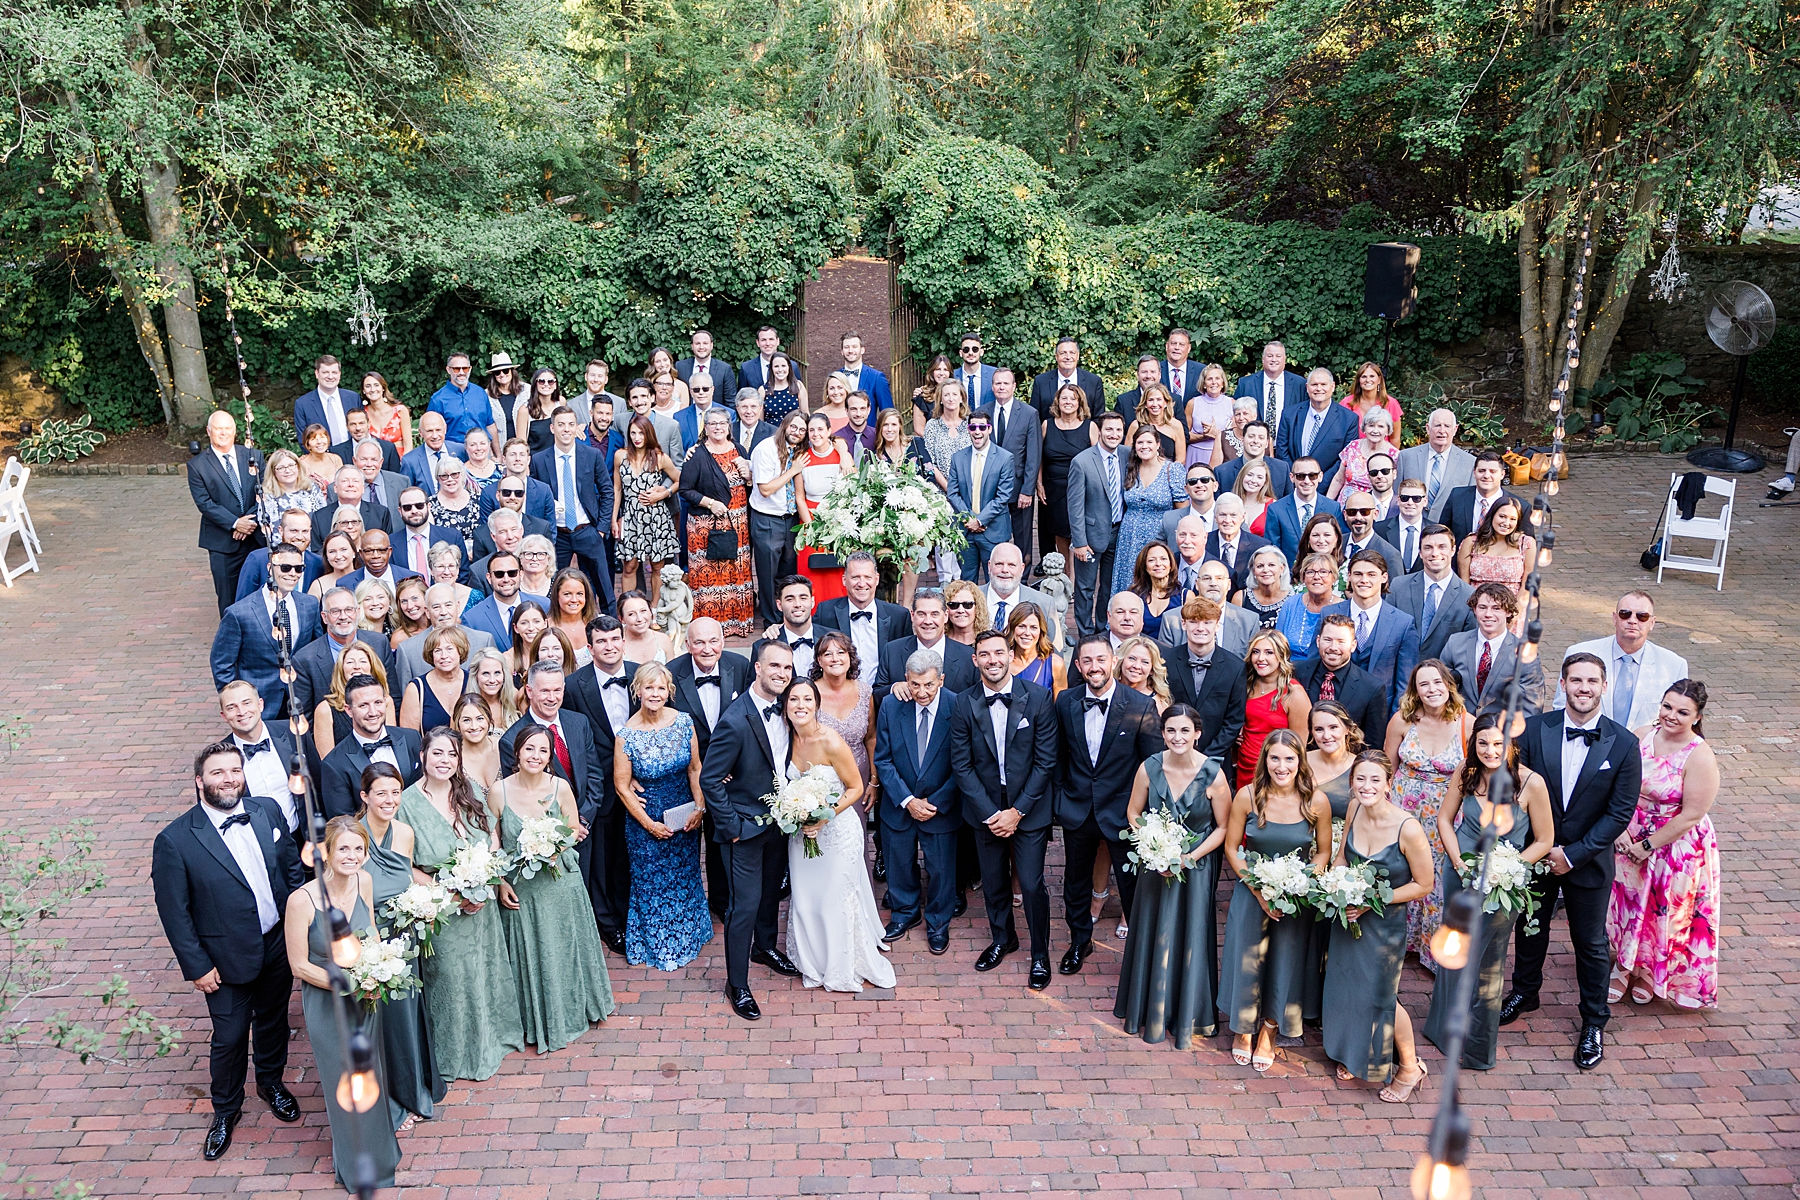 wedding group photo with all the guests